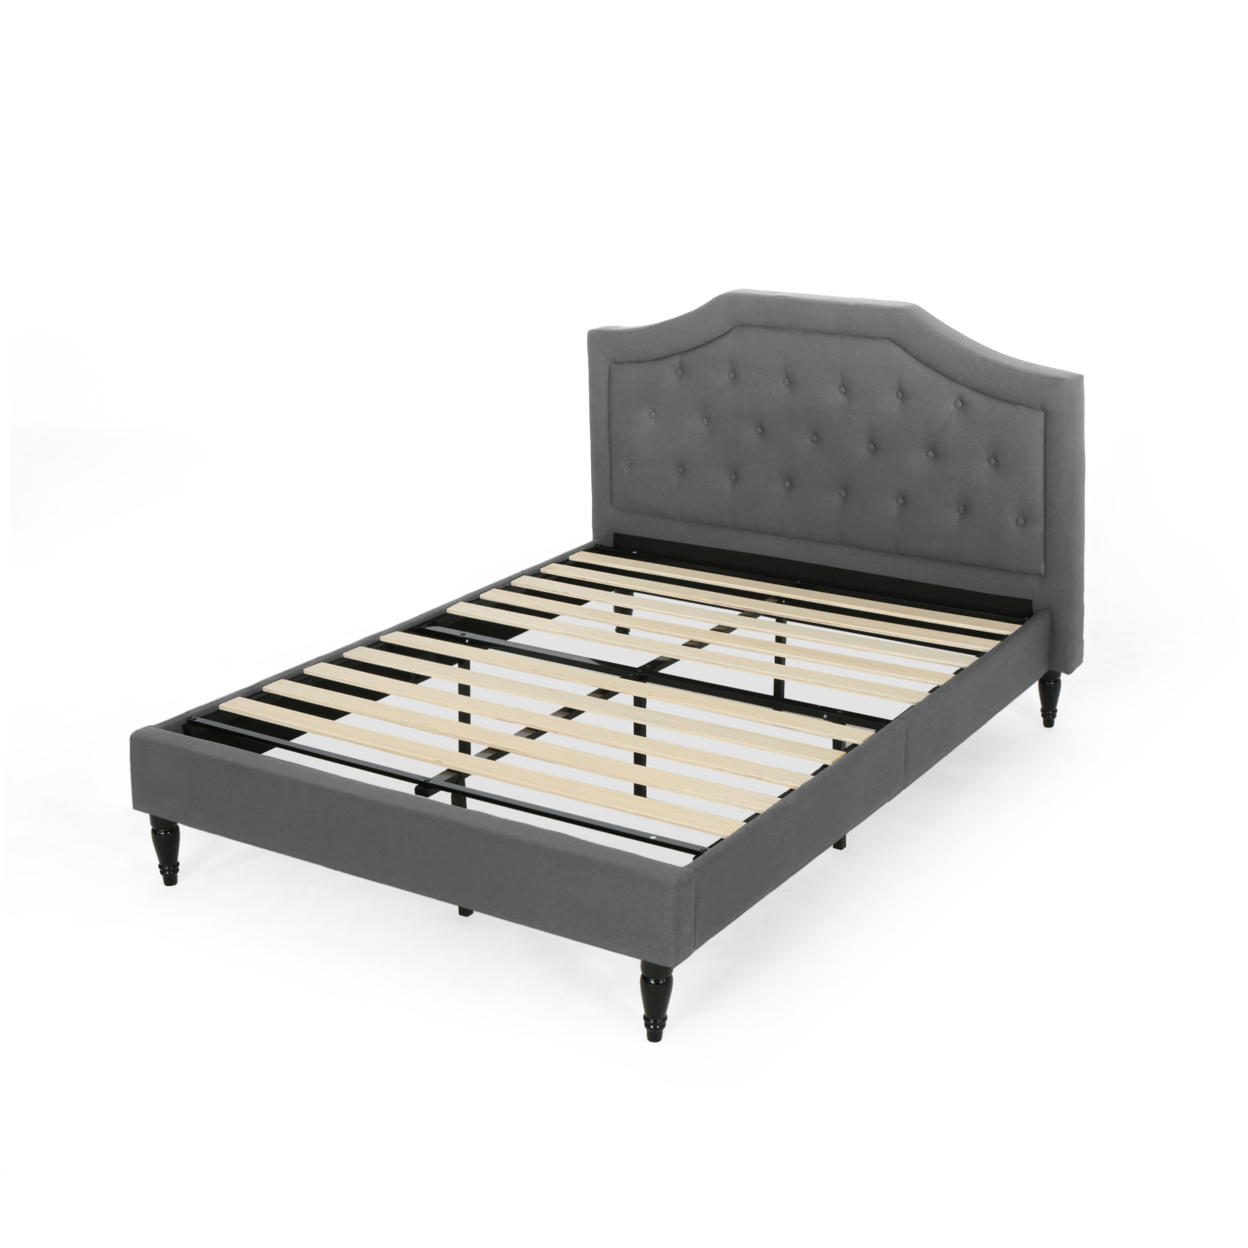 Veromca Theresa Contemporary Fabric Upholstered Queen Sized Bed Set - Charcoal Gray + Dark Brown